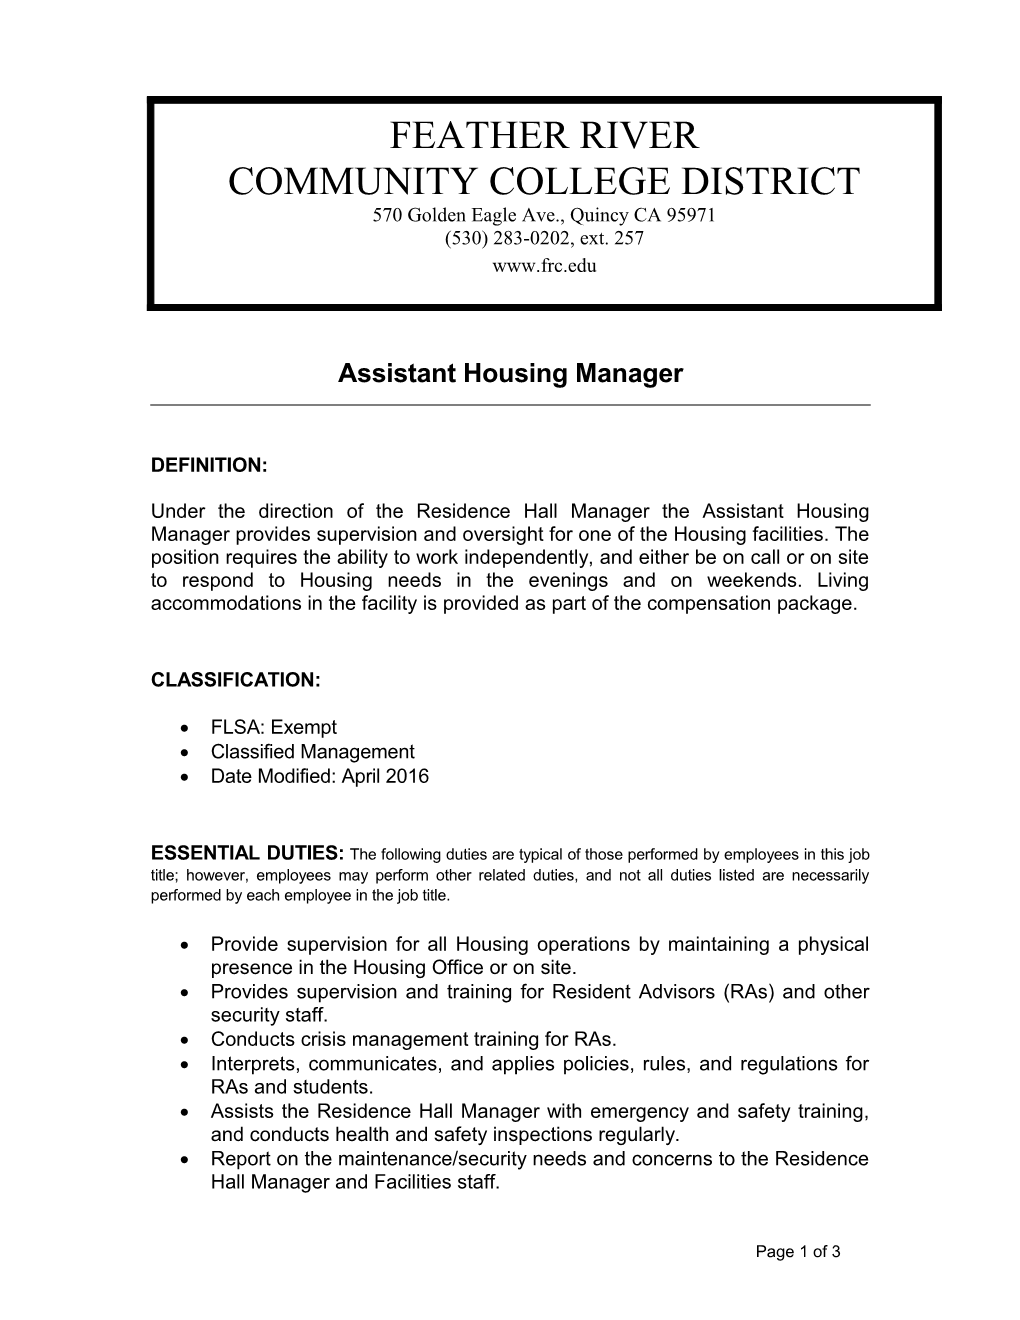 Assistant Housing Manager